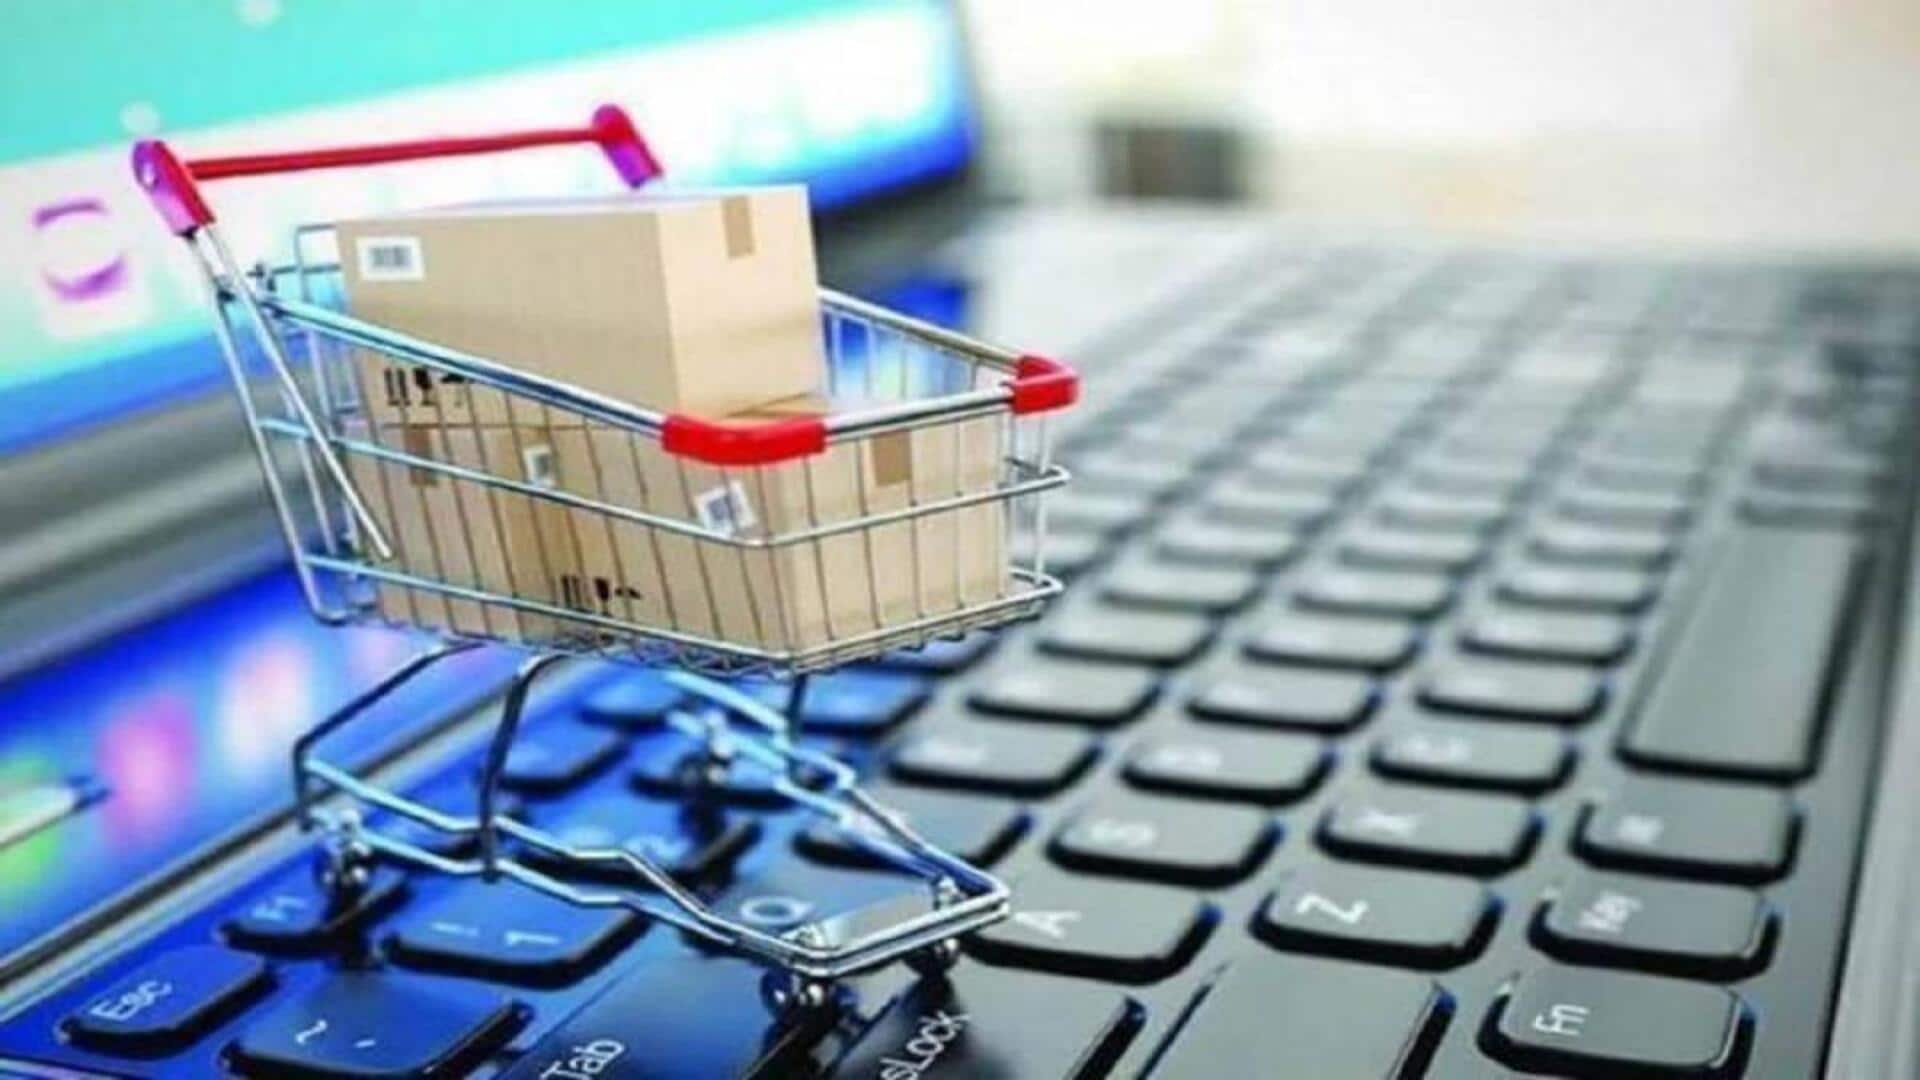 Indian government's 100-day plan may include new e-commerce policy